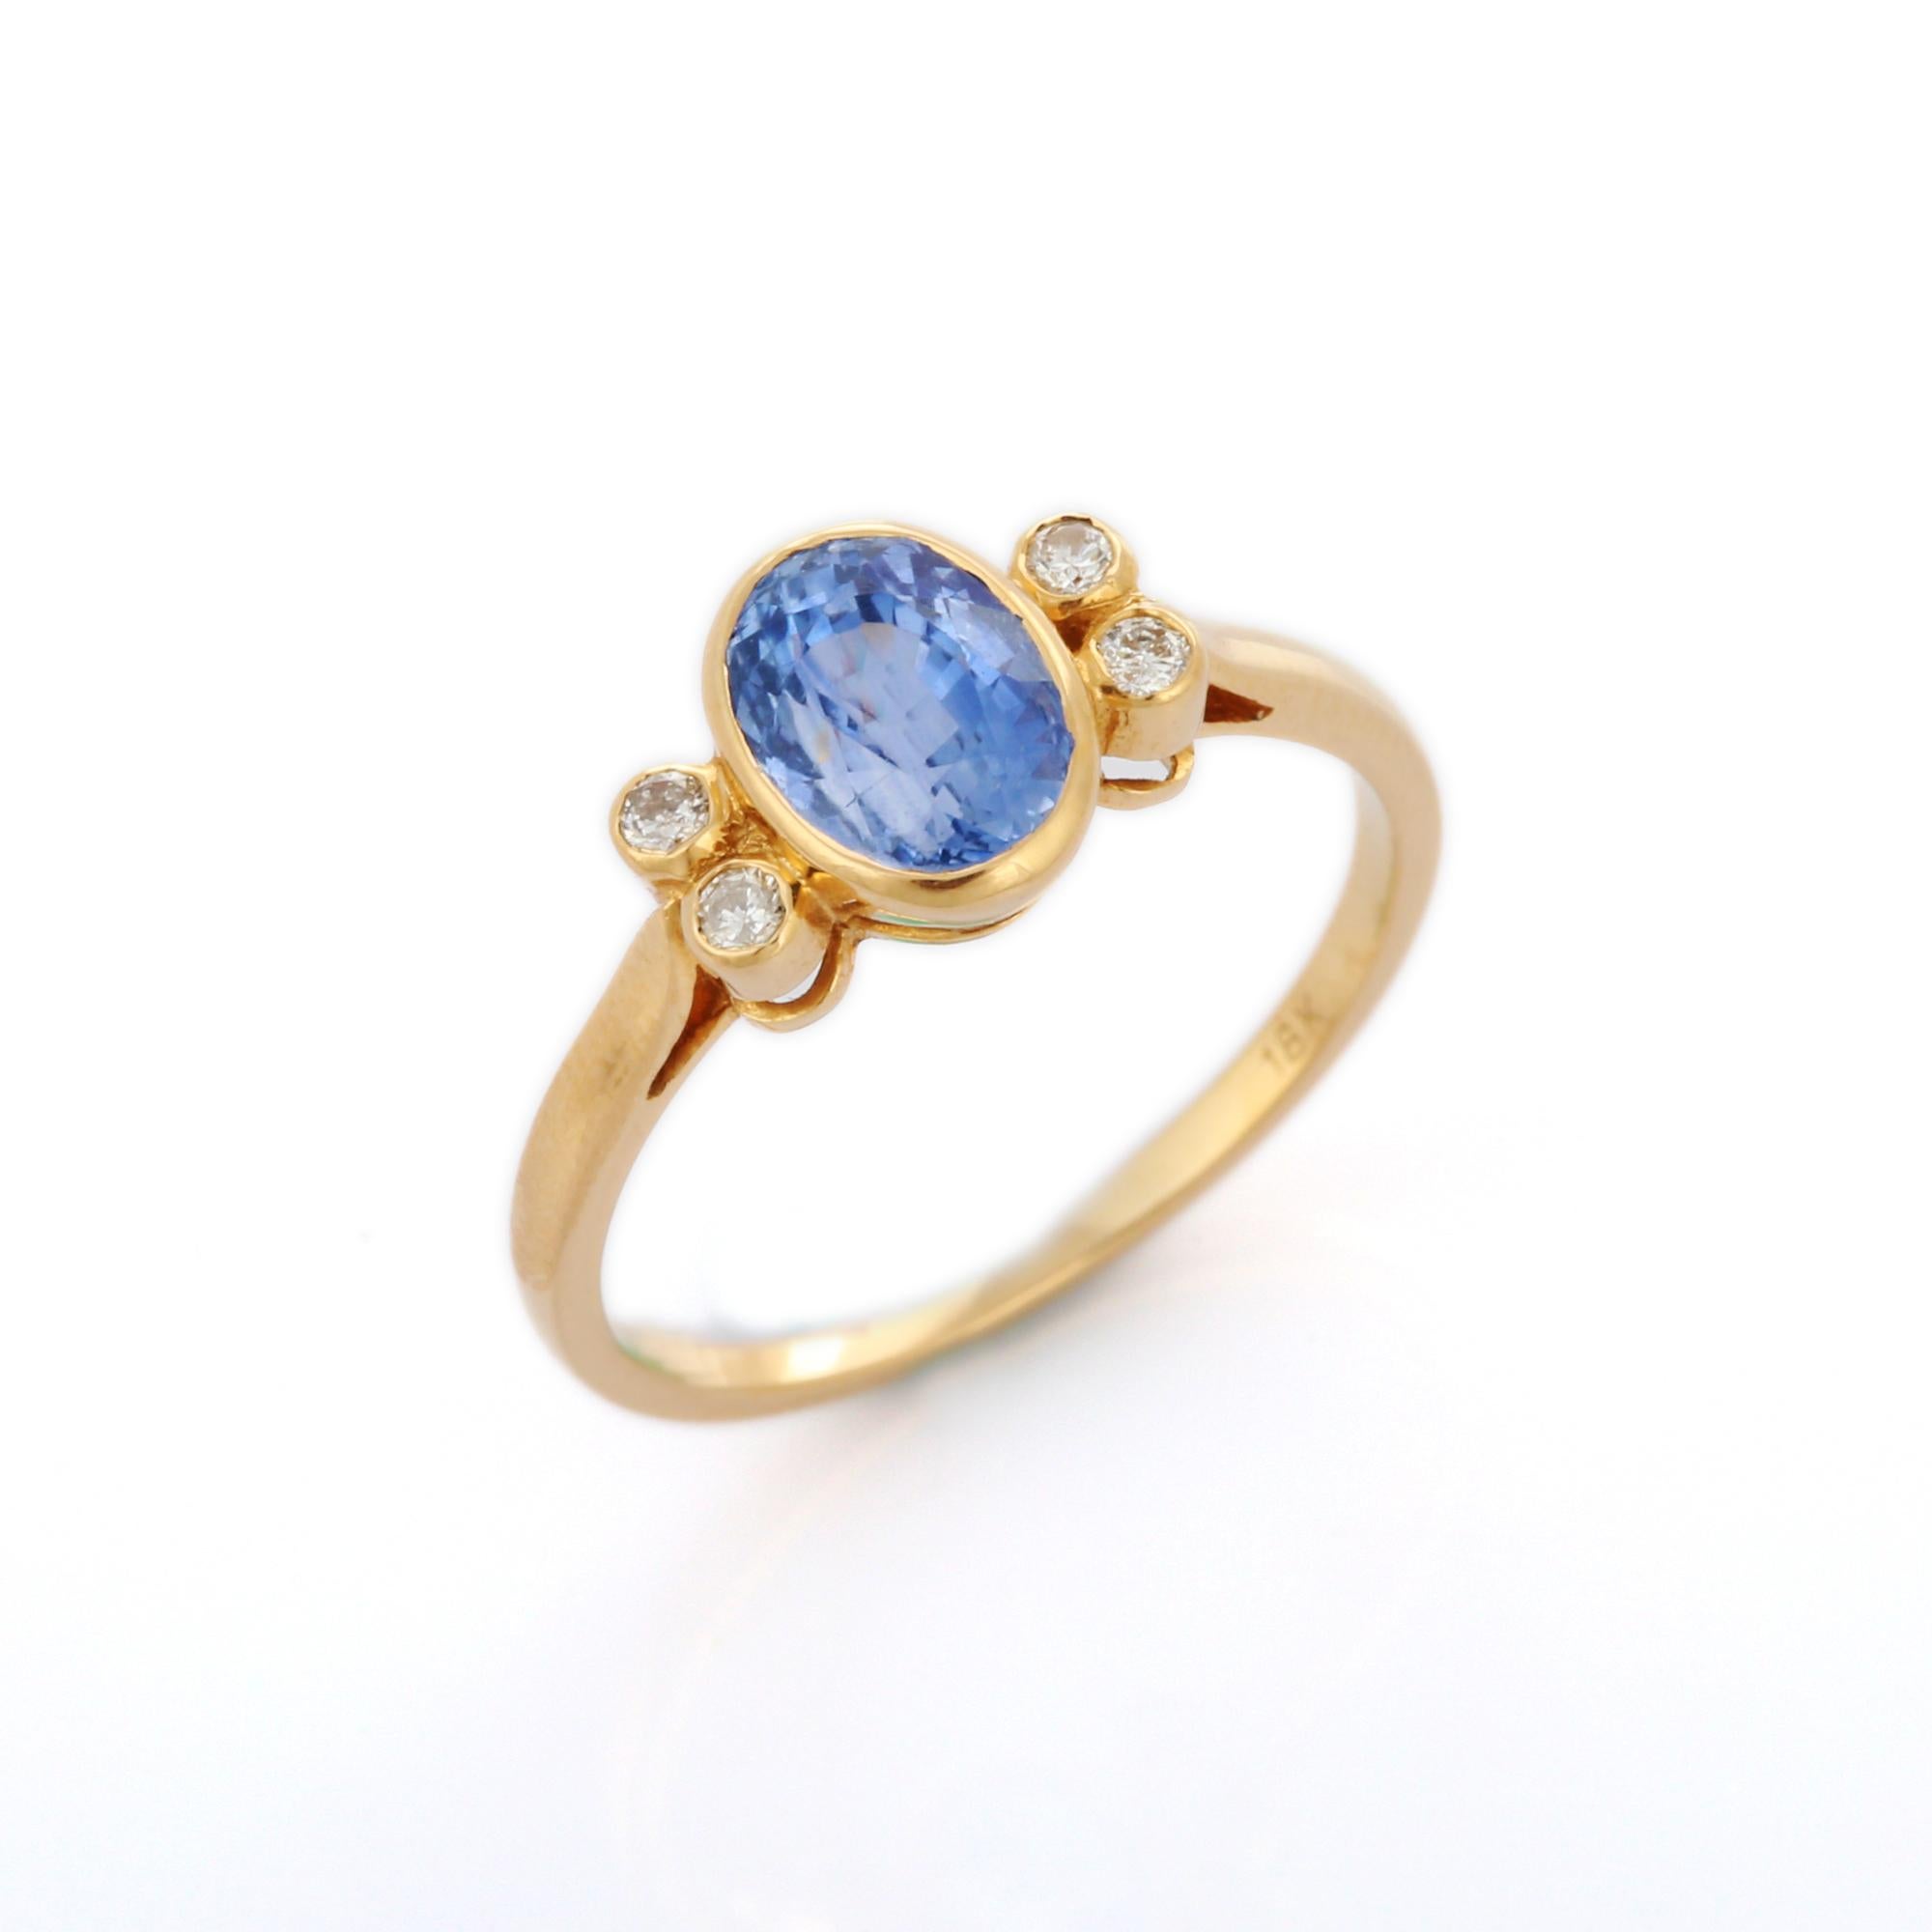 For Sale:  Blue Sapphire and Diamond Wedding Ring in 18K Yellow Gold 5